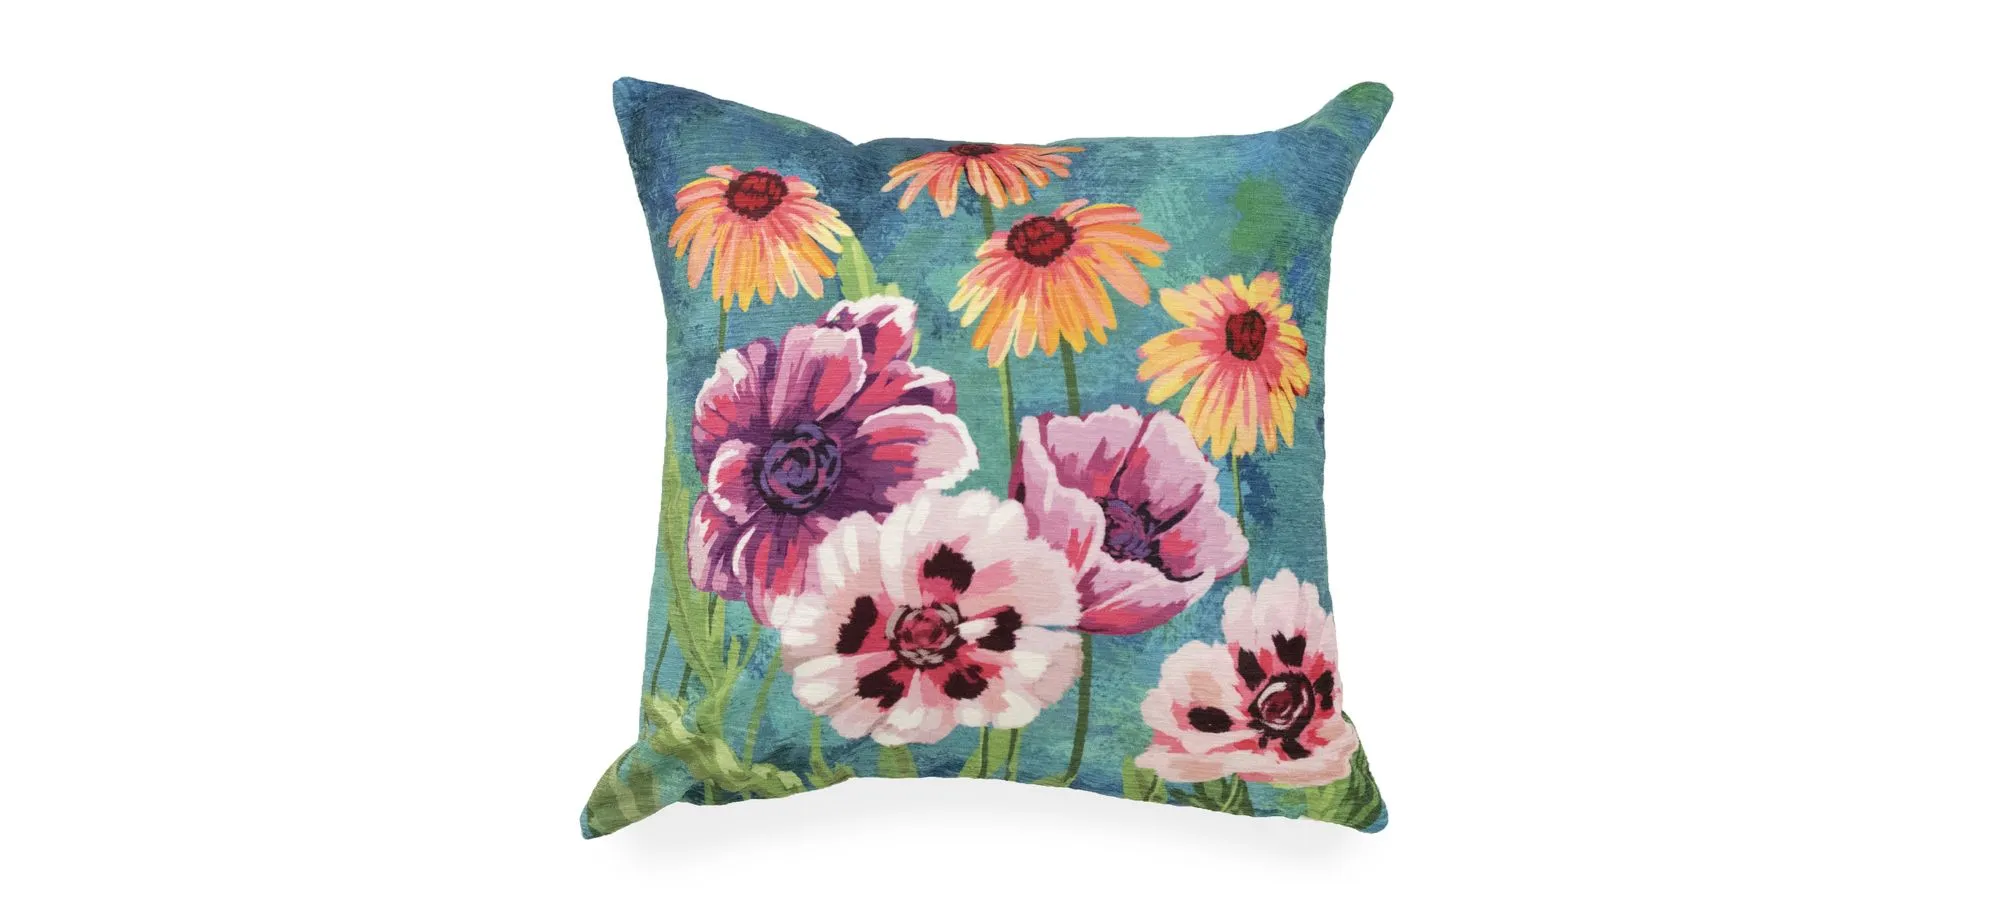 Liora Manne Illusions Dream Garden Pillow in Multi by Trans-Ocean Import Co Inc